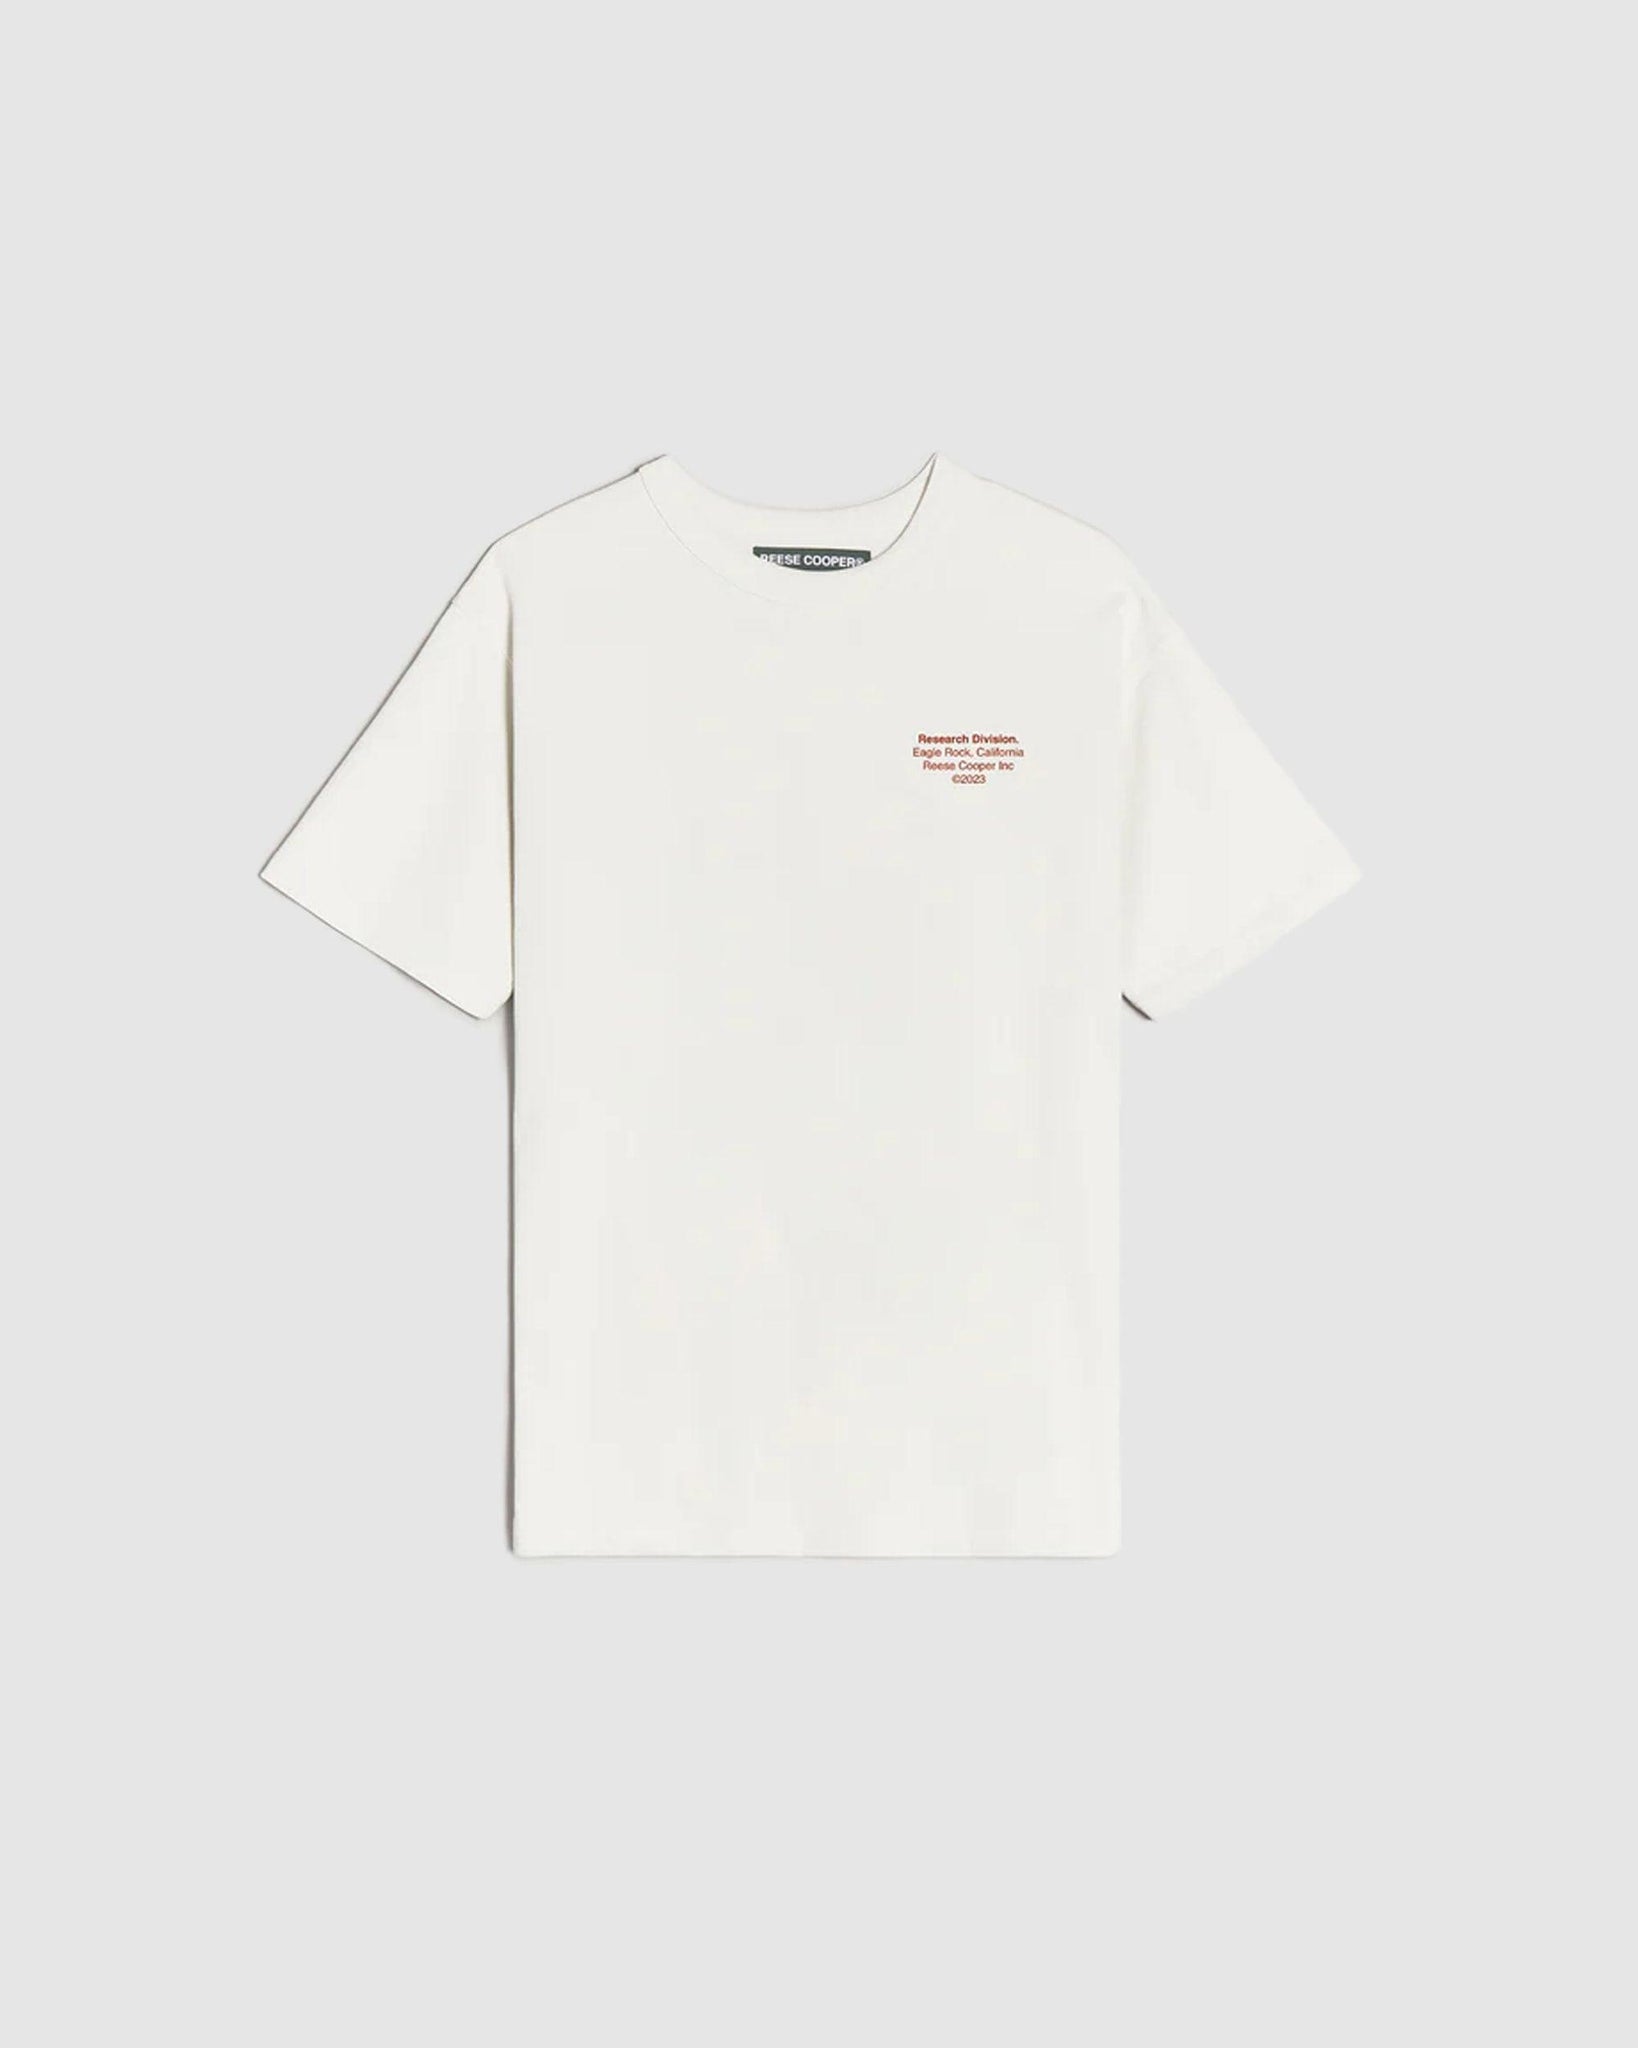 Keep Going T-Shirt - {{ collection.title }} - Chinatown Country Club 